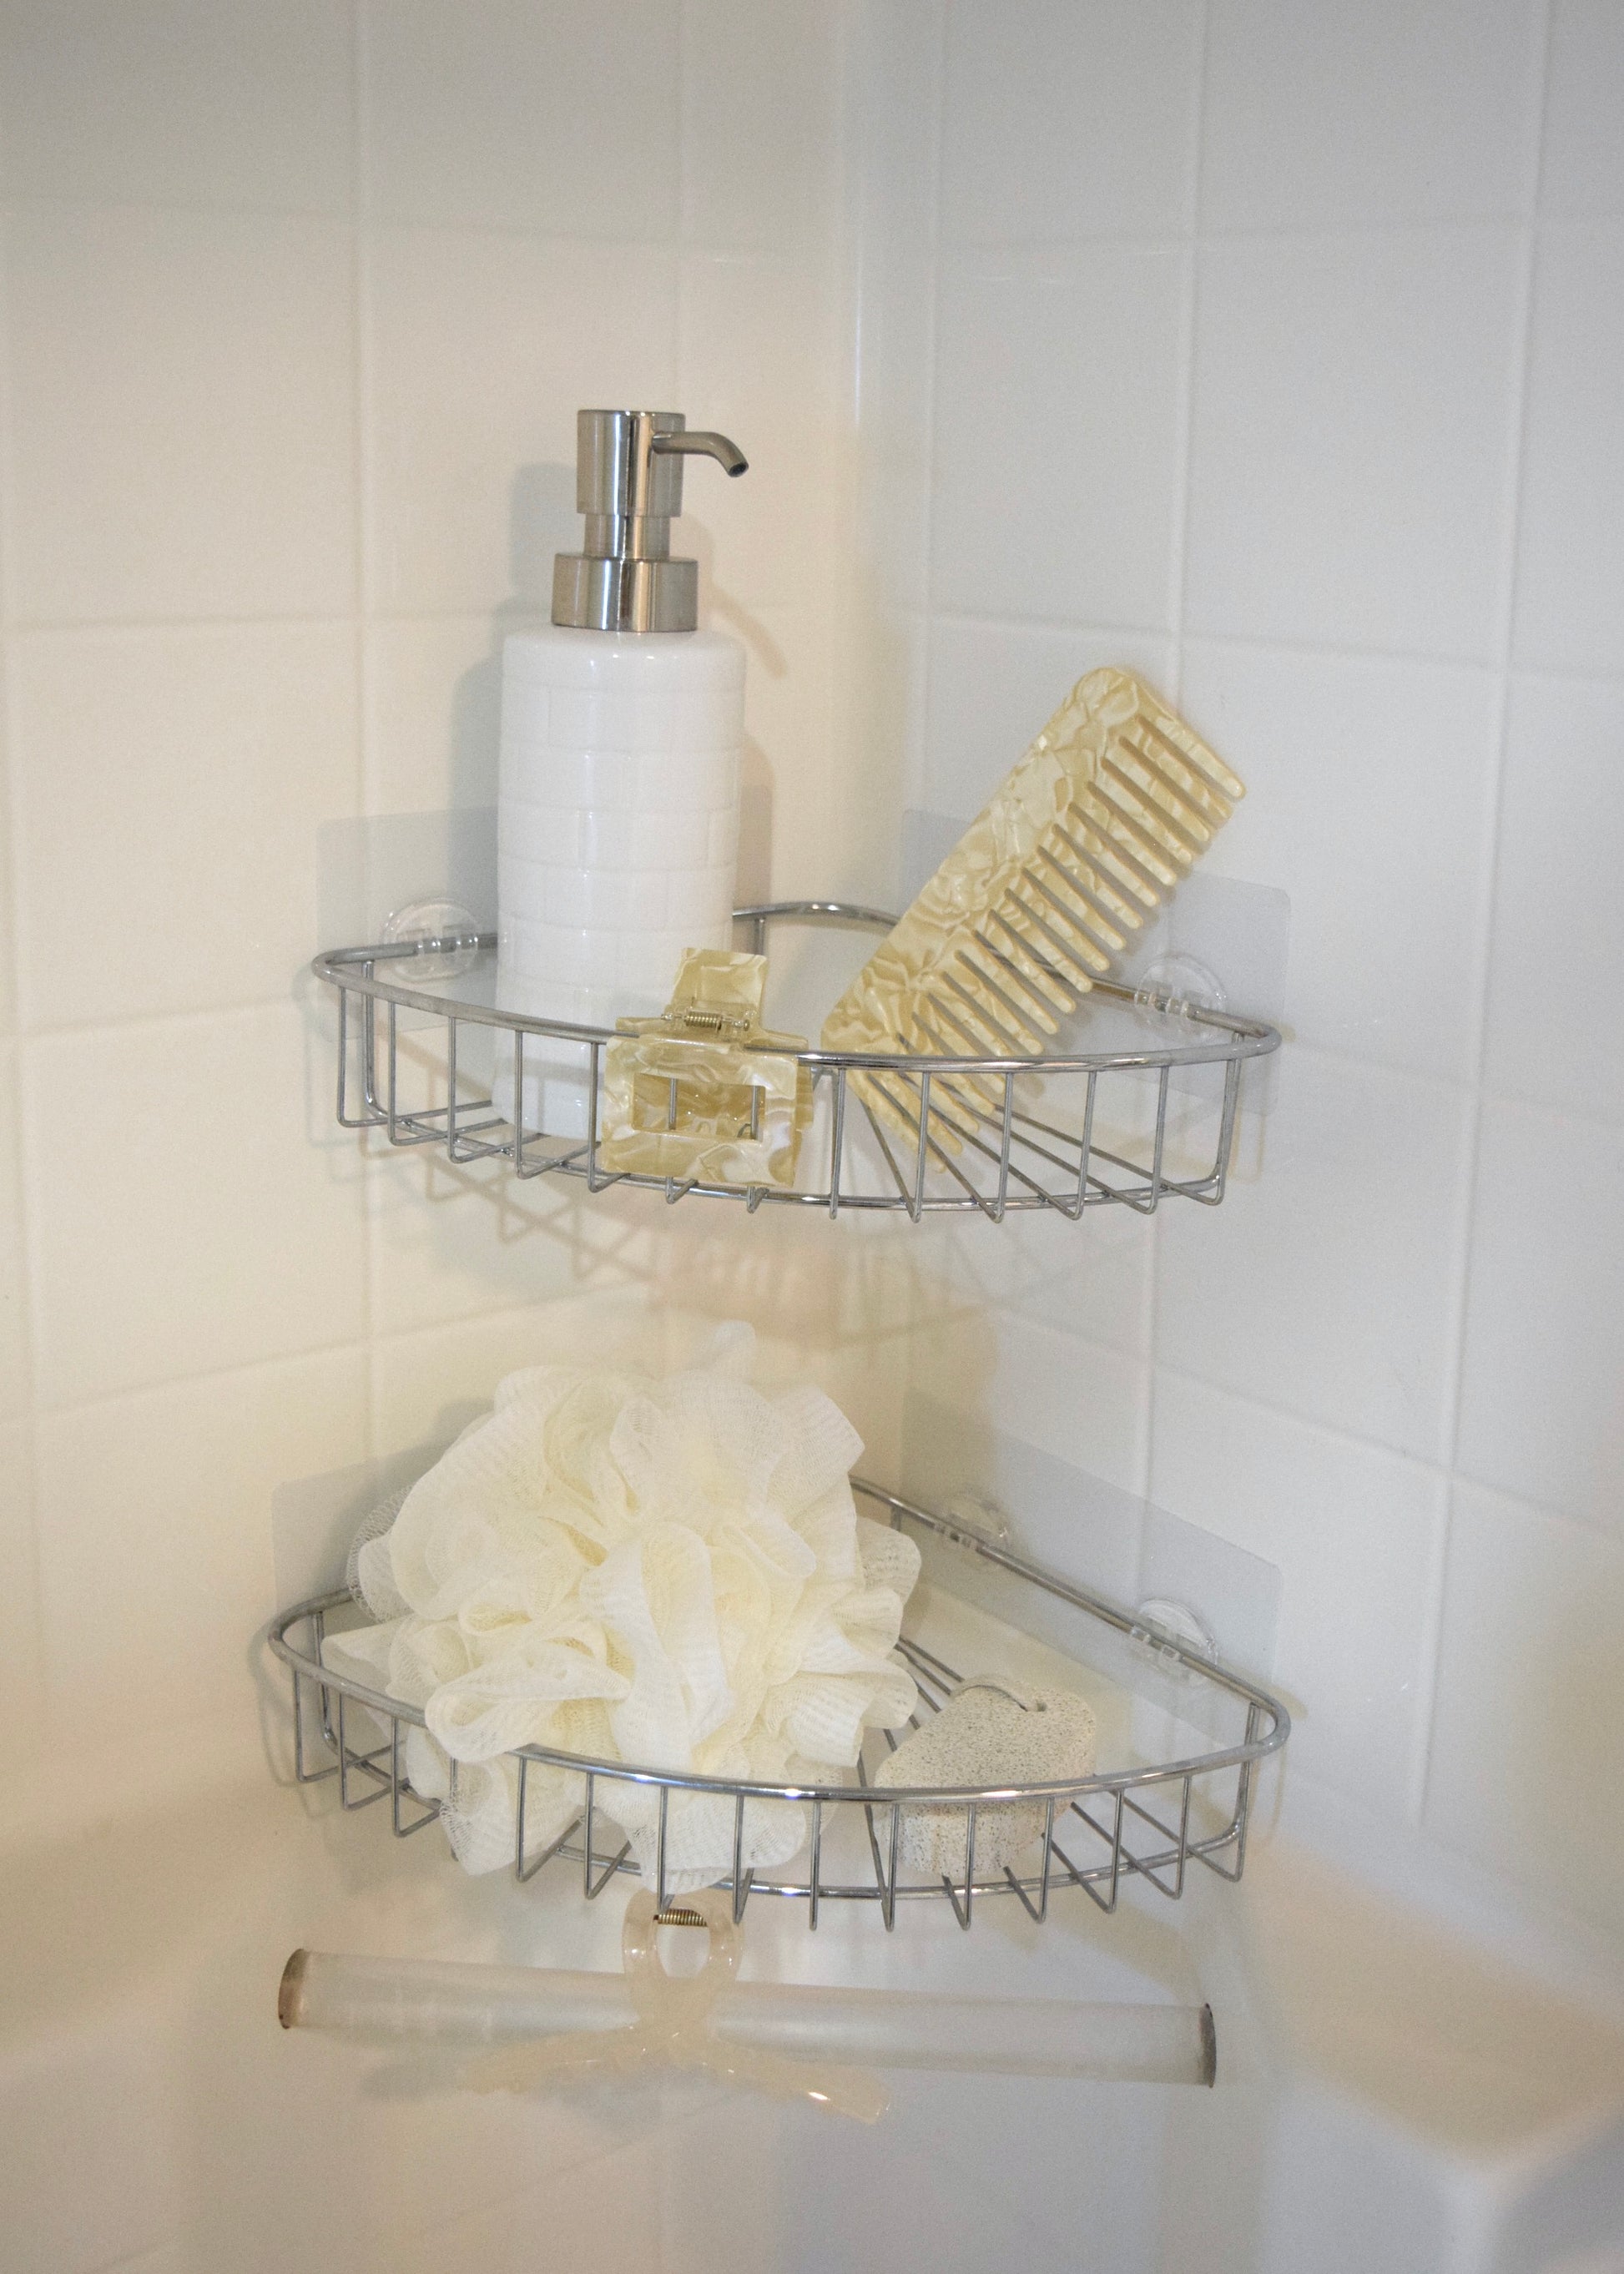 Marble wide tooth detangling comb placed on shower shelf